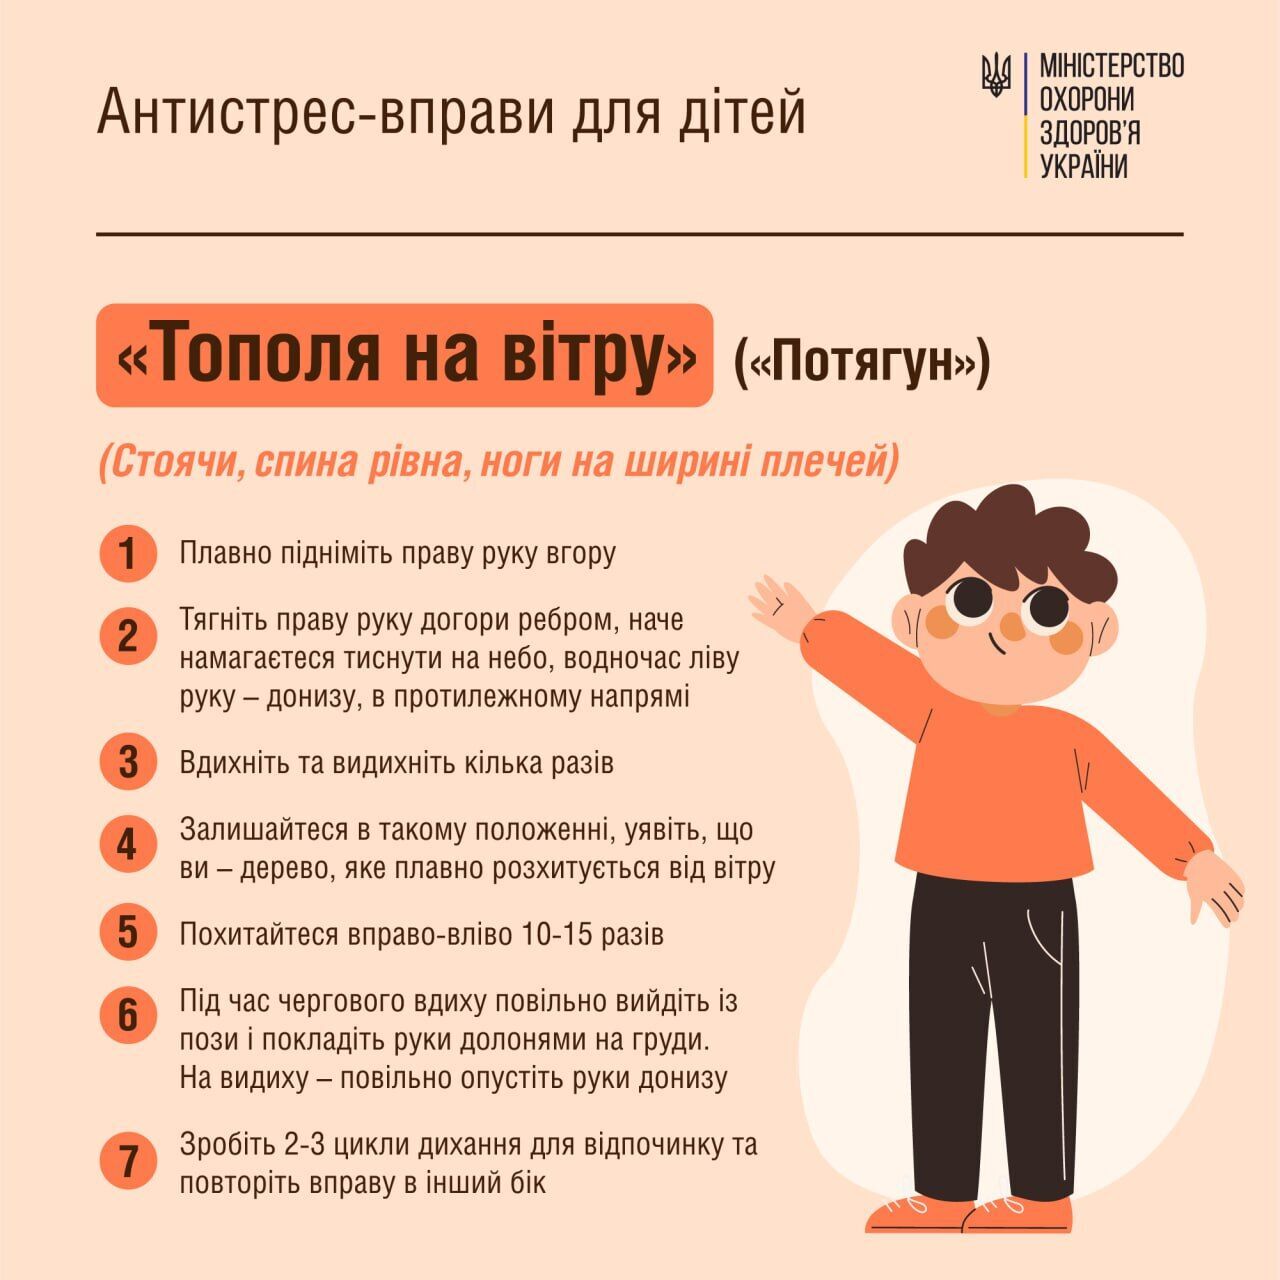 How to cope with stress of a child: simple exercises from the Ministry of Health